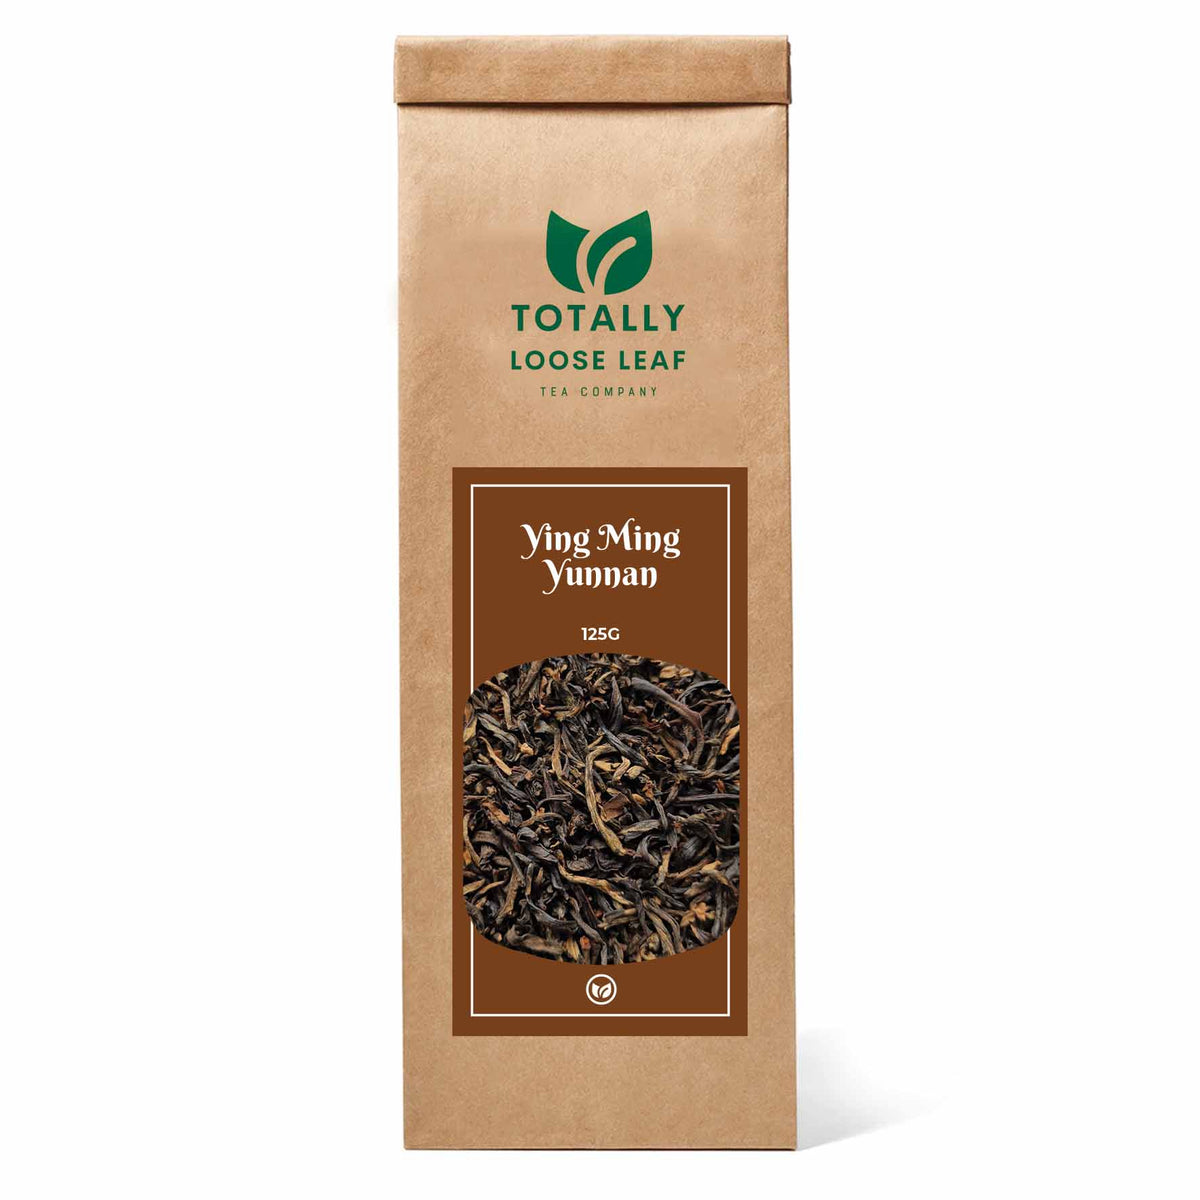 Ying Ming Yunnan Black Loose Leaf Tea - one pouch